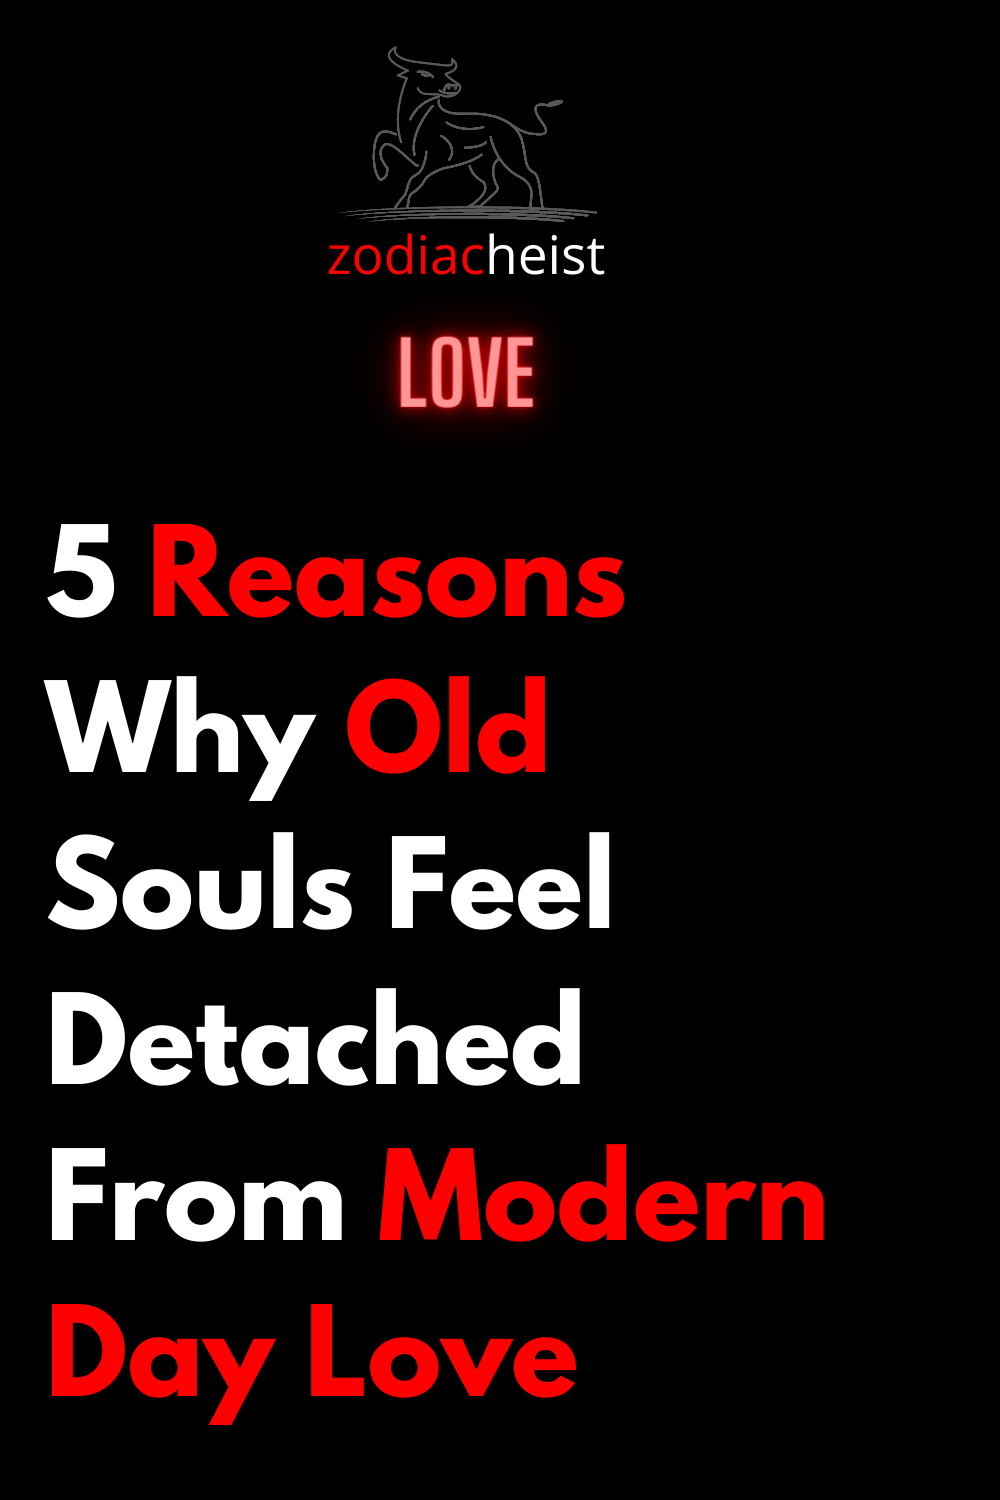 5 Reasons Why Old Souls Feel Detached From Modern Day Love